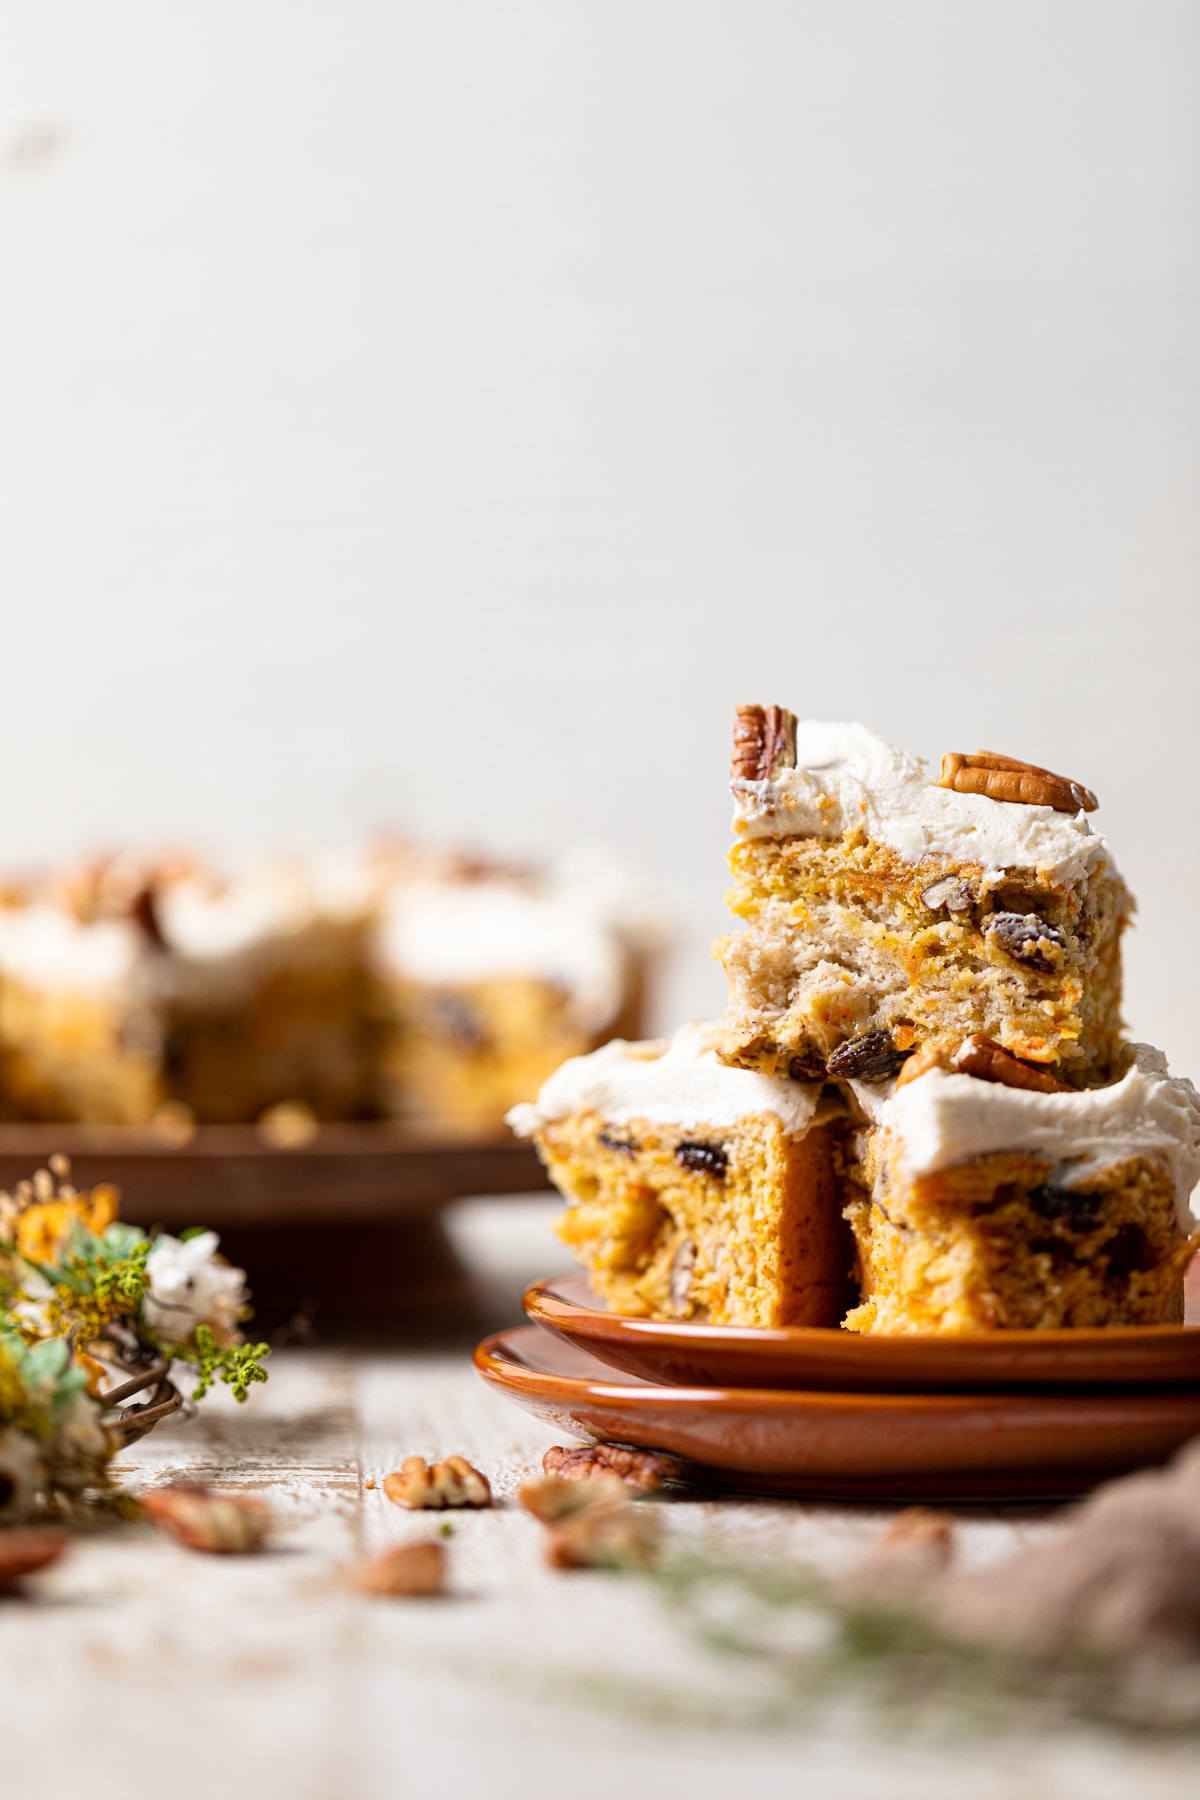 Pieces of Vegan Carrot Cake with Orange-infused Frosting on two small, stacked plates